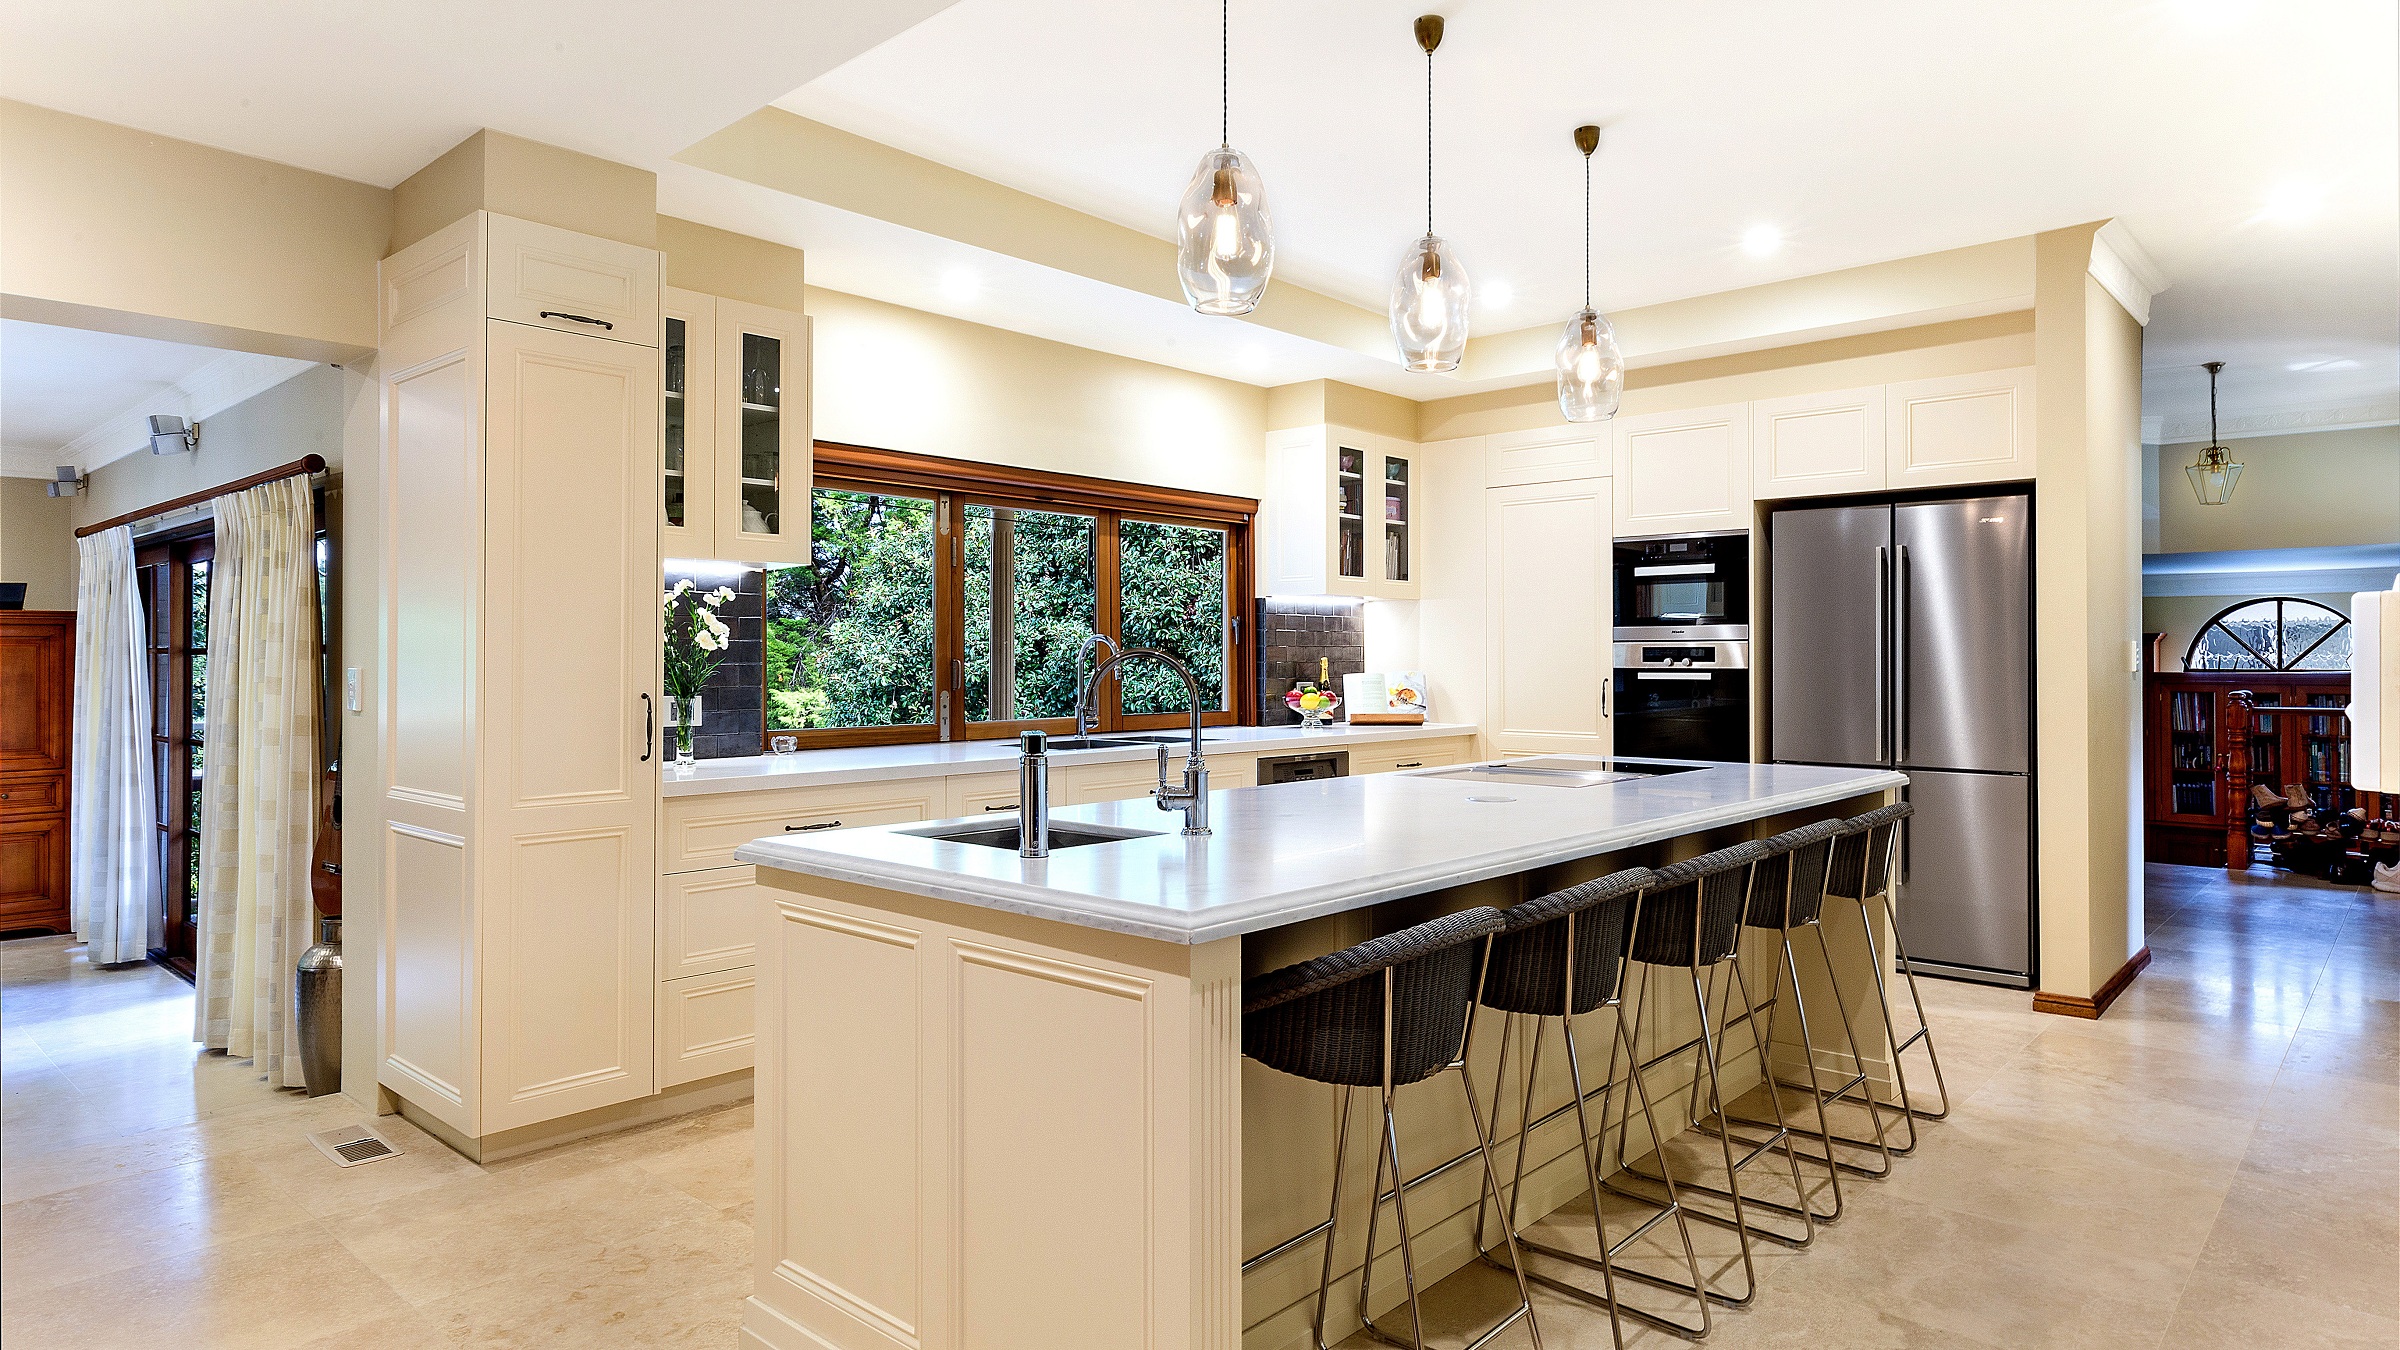 Epping, Provincial Style kitchen in a Satin Polyurethane finish with a Carrara Marble benchtop